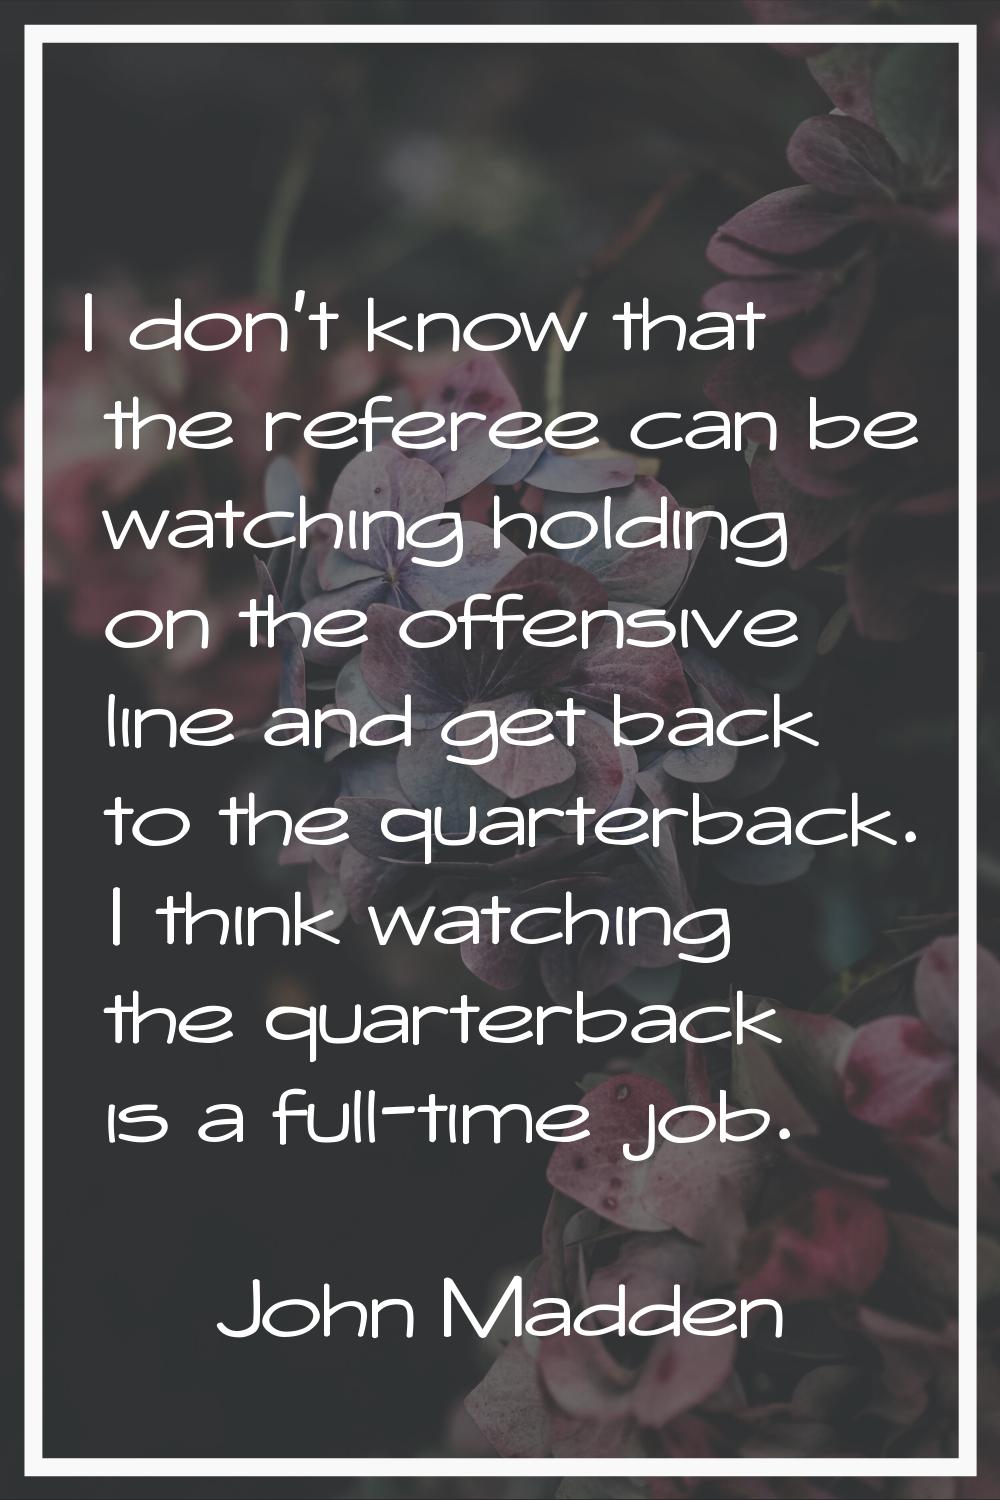 I don't know that the referee can be watching holding on the offensive line and get back to the qua